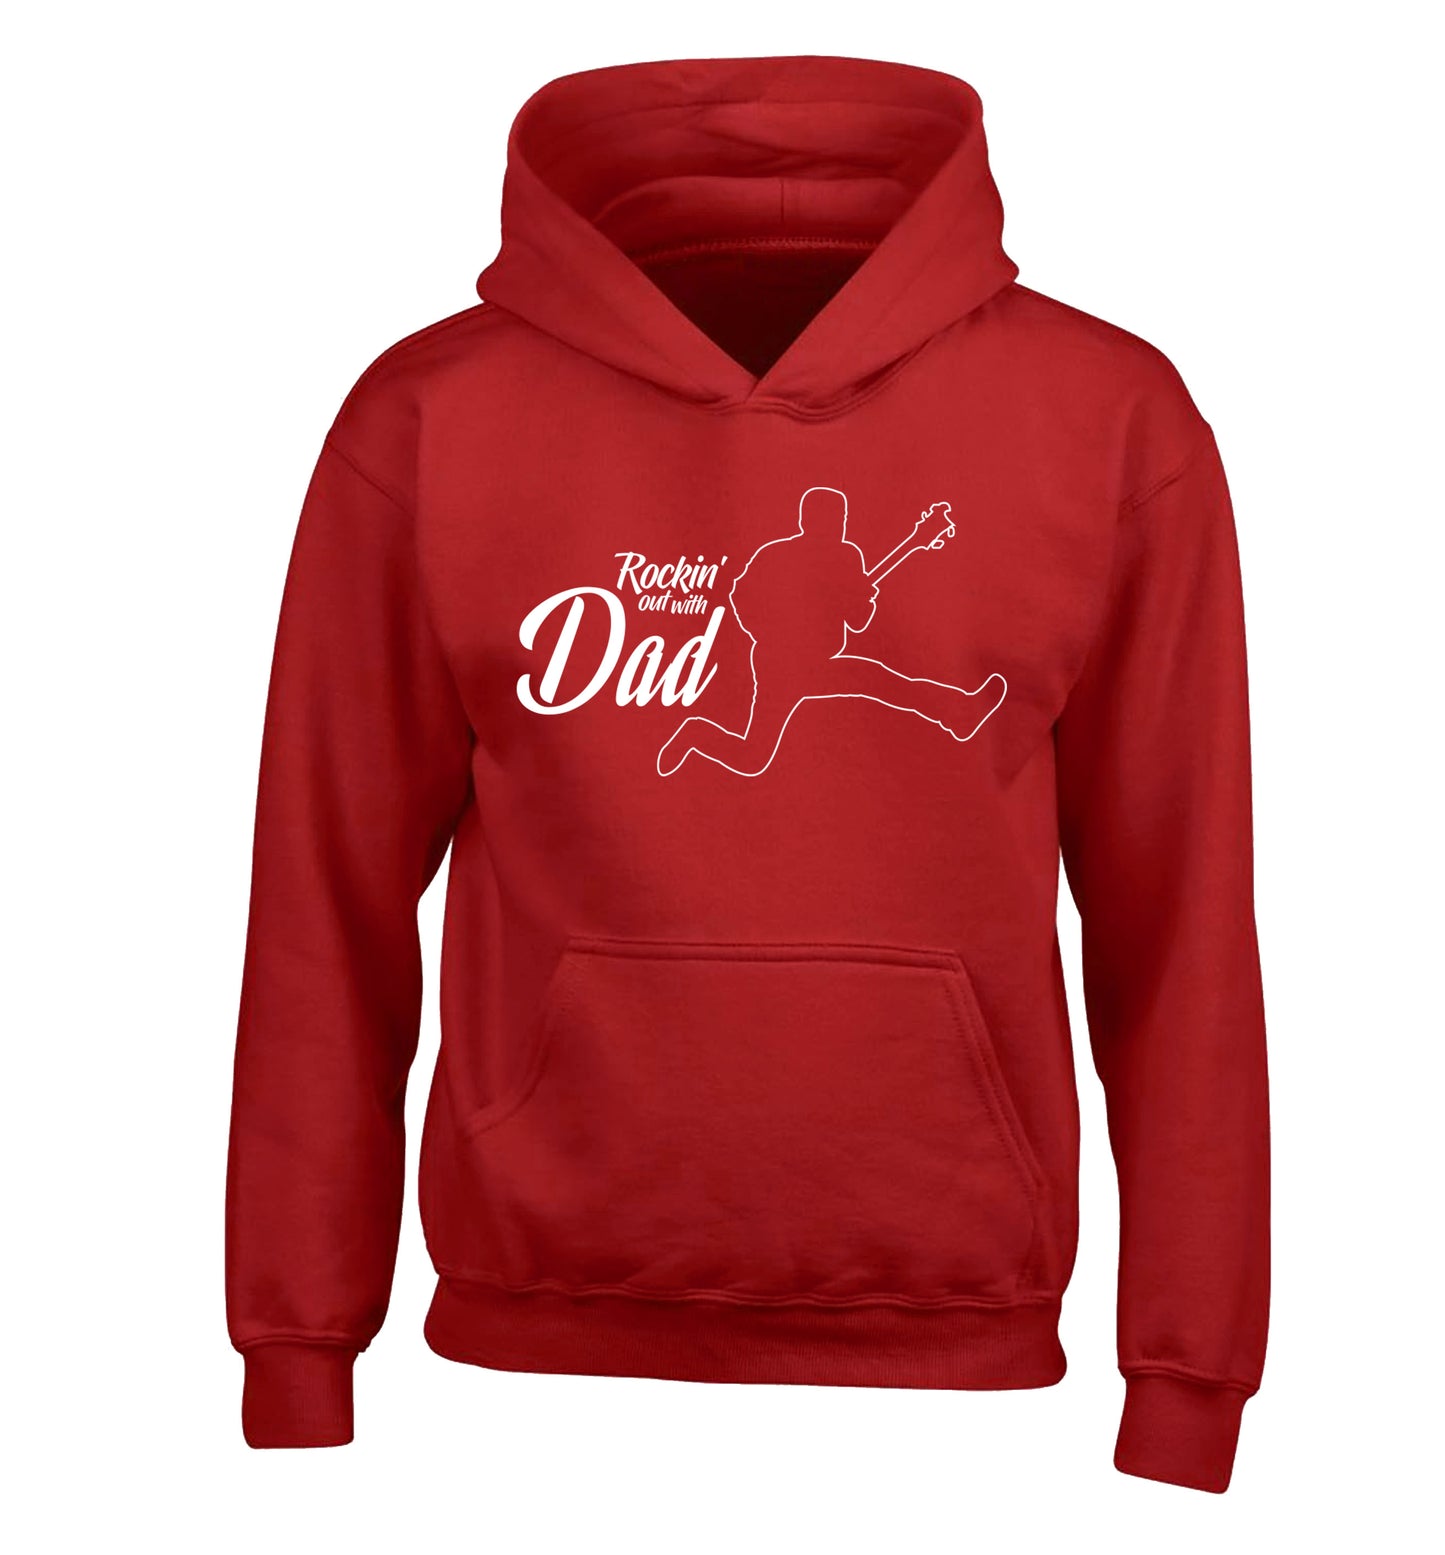 Rockin out with dad children's red hoodie 12-13 Years